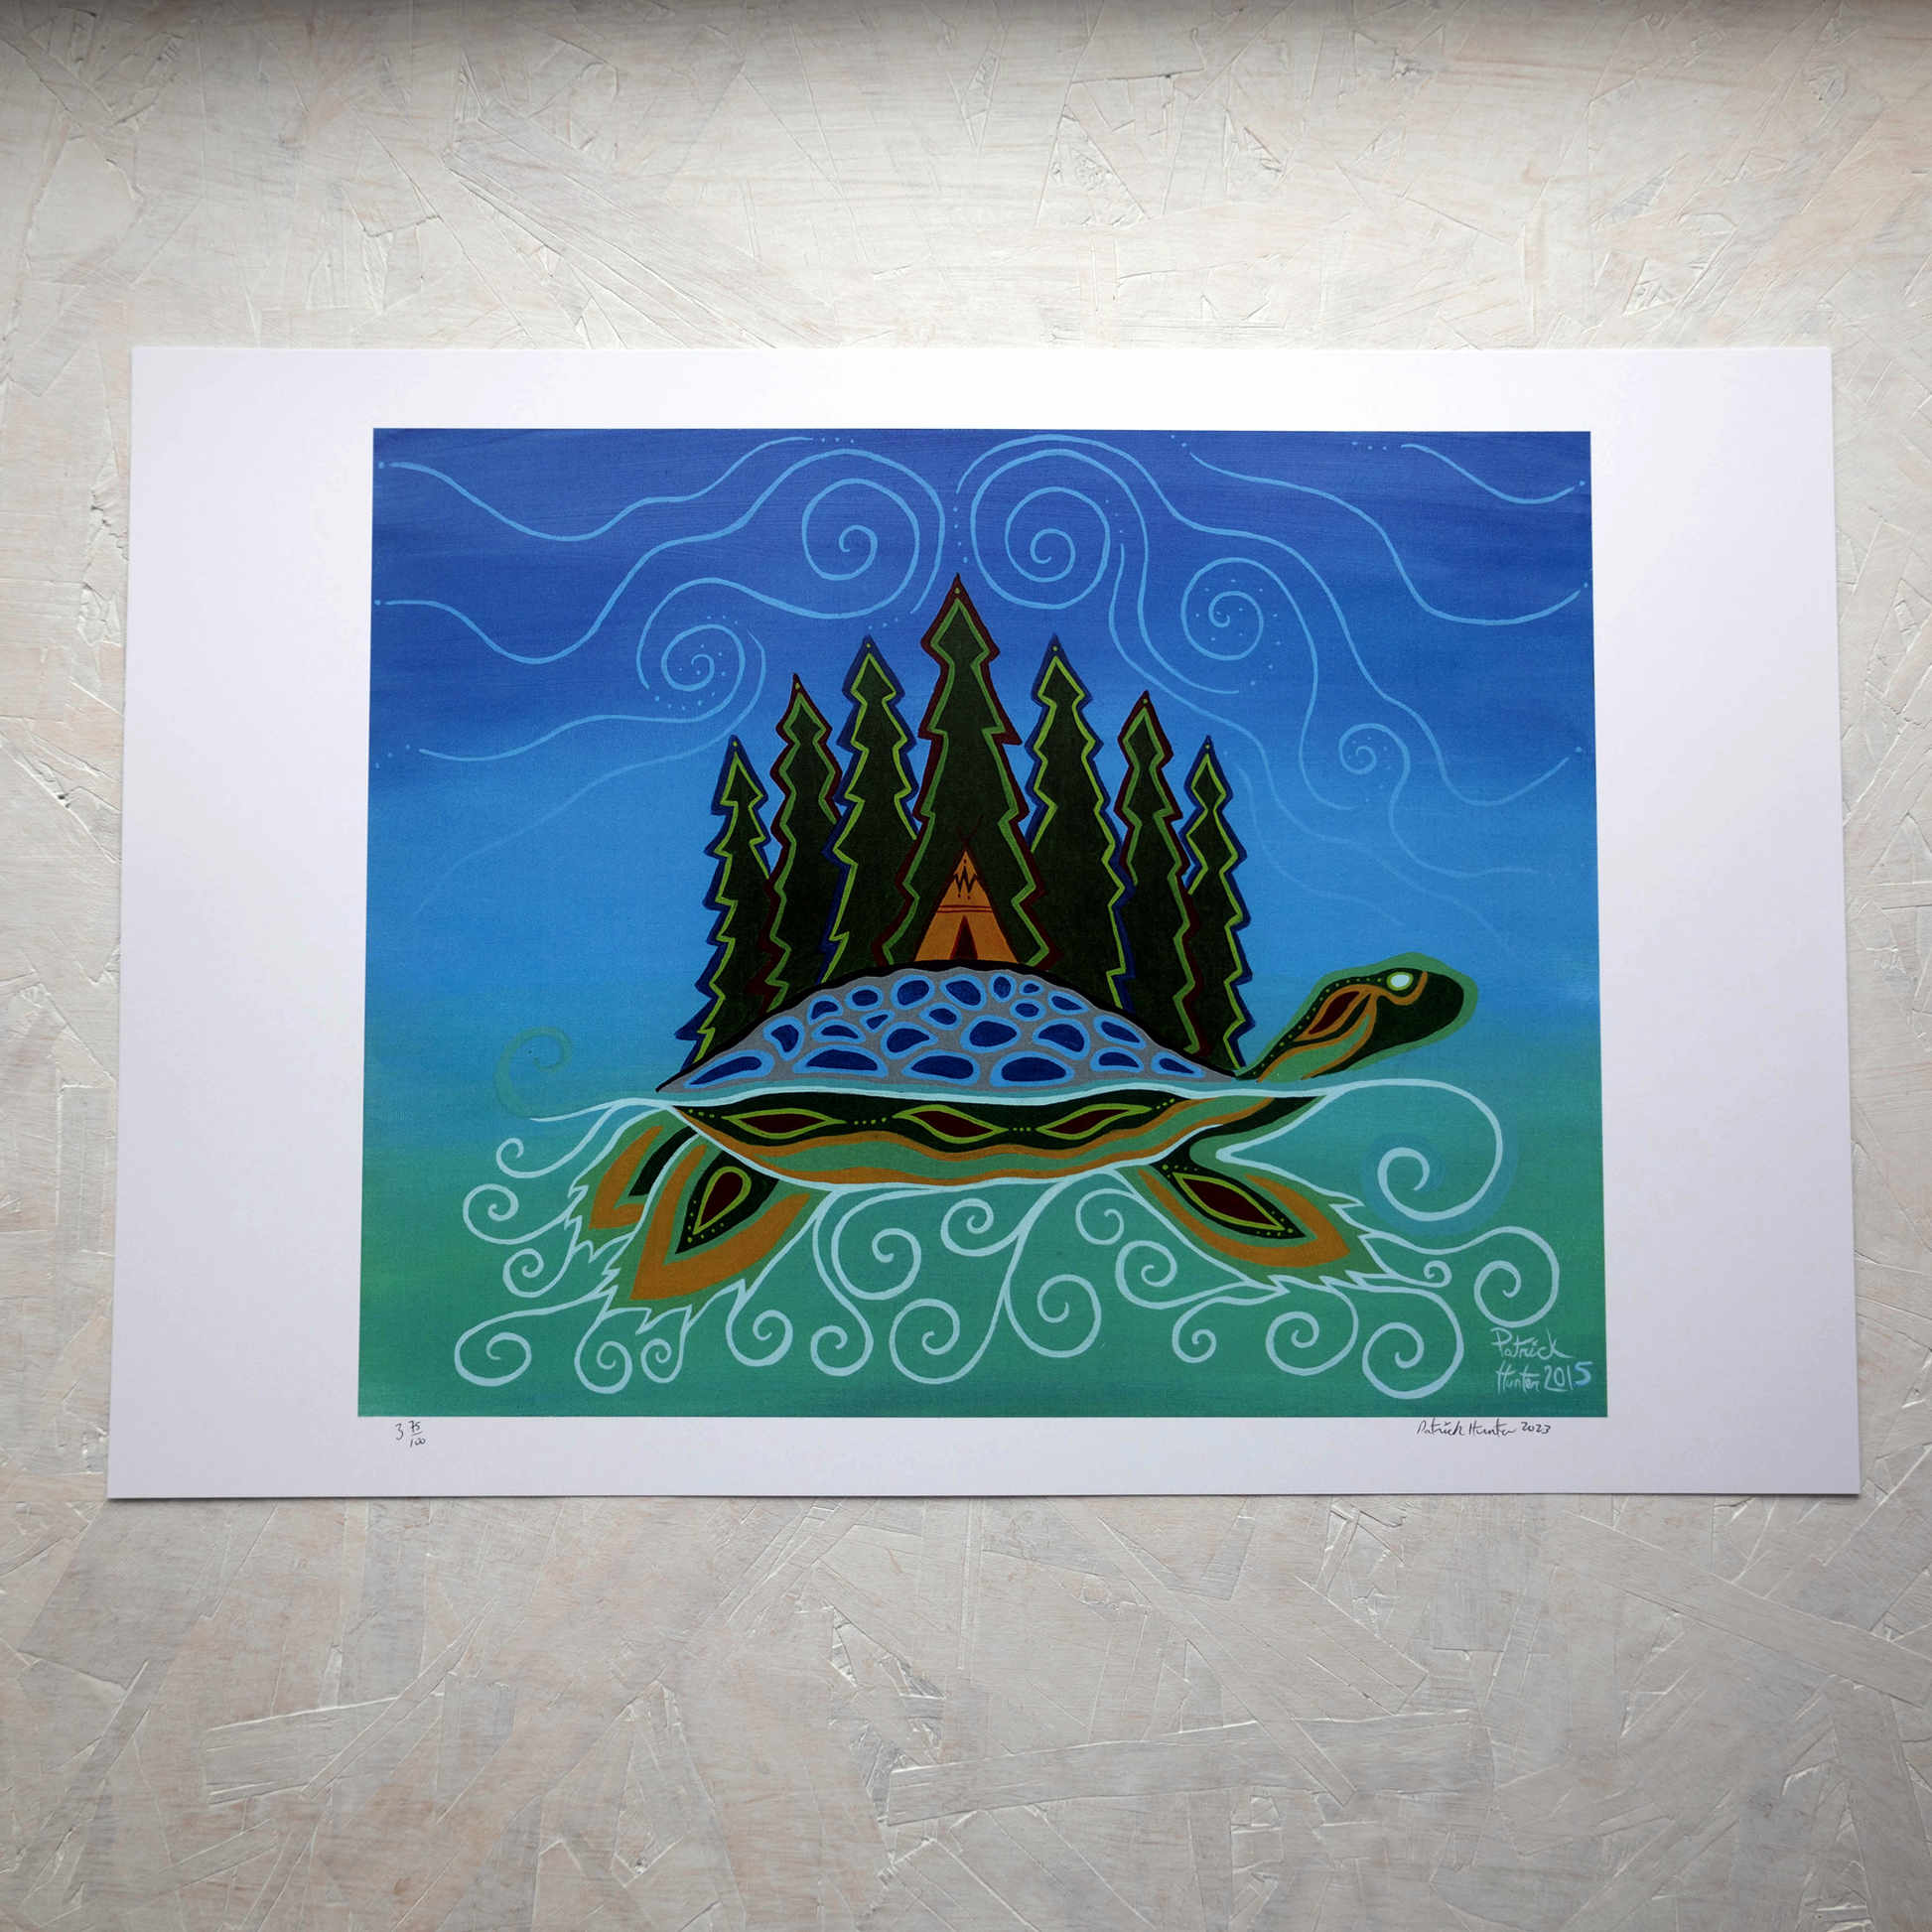 Print of Patrick Hunter's painting of a turtle, hosting an island with forest on its back while swimming in water, woodland art style.